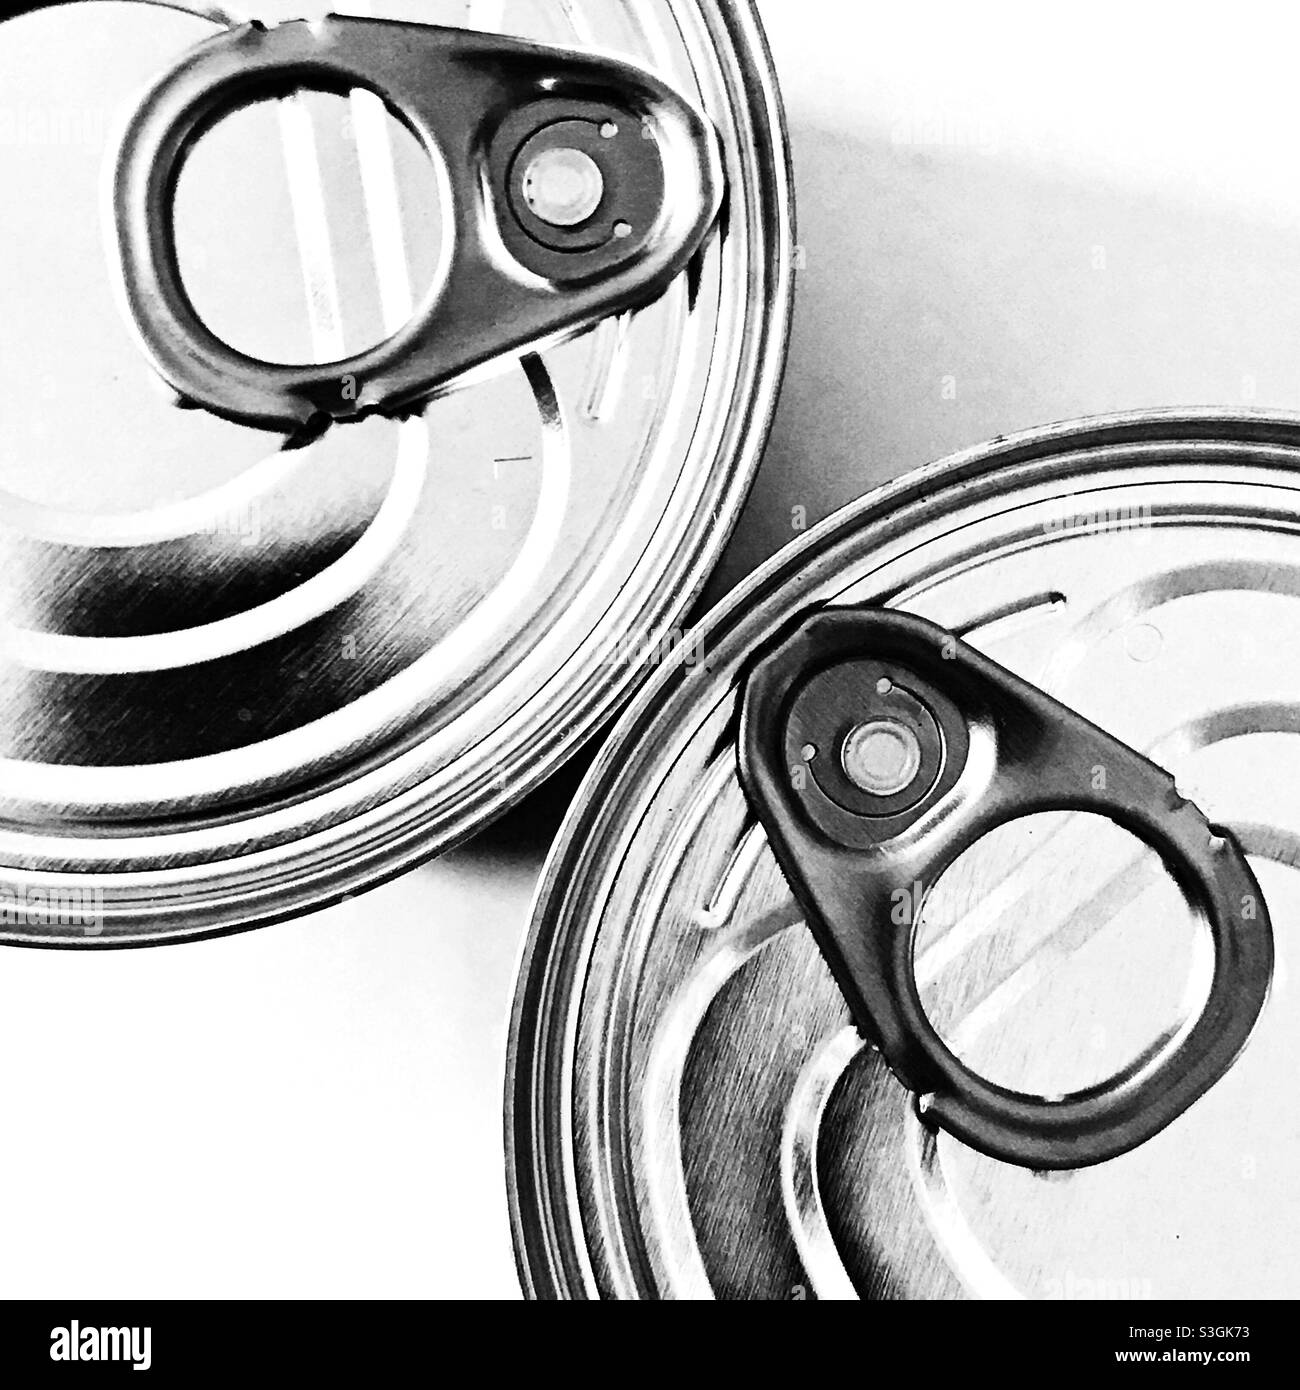 Ring pulls on canned food tins. Stock Photo